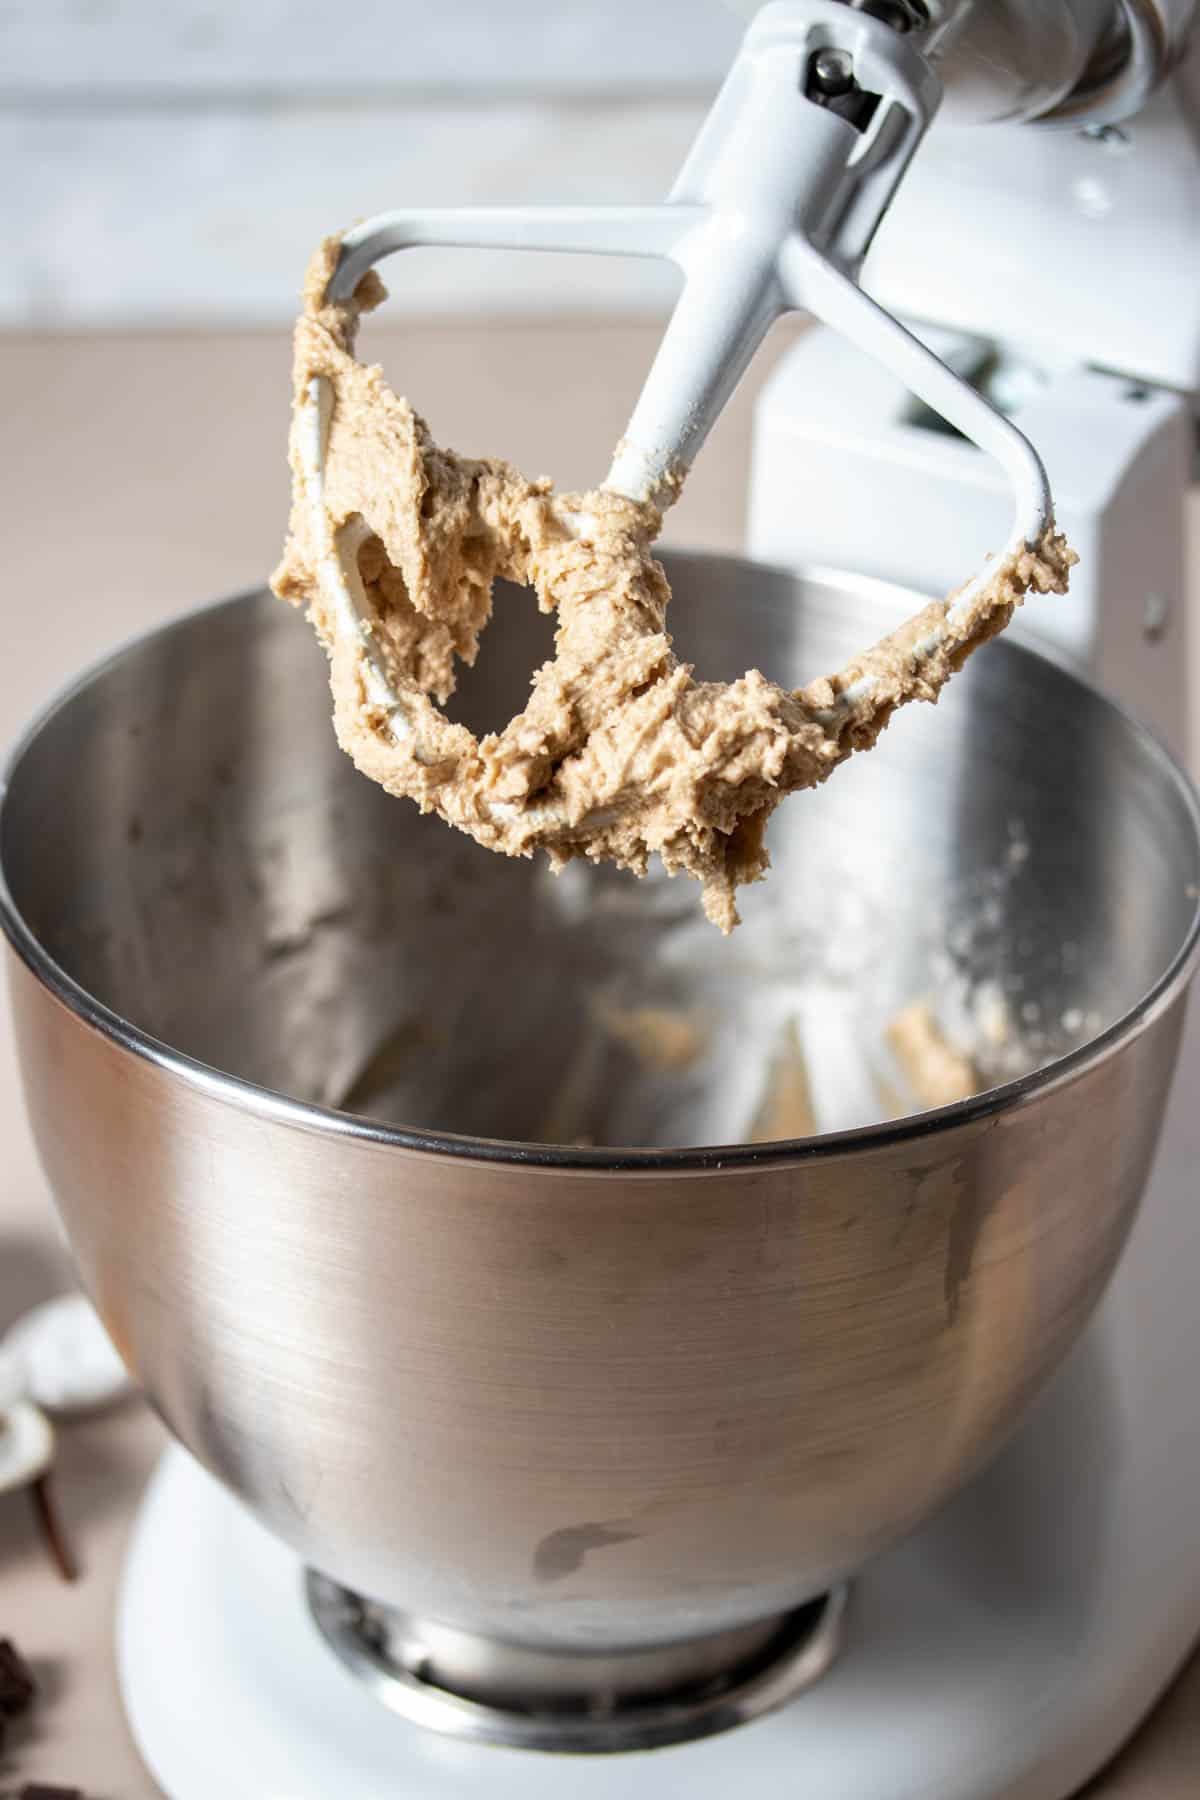 A white stand mixer with a paddle and cookie dough on it without chocolate chips yet.